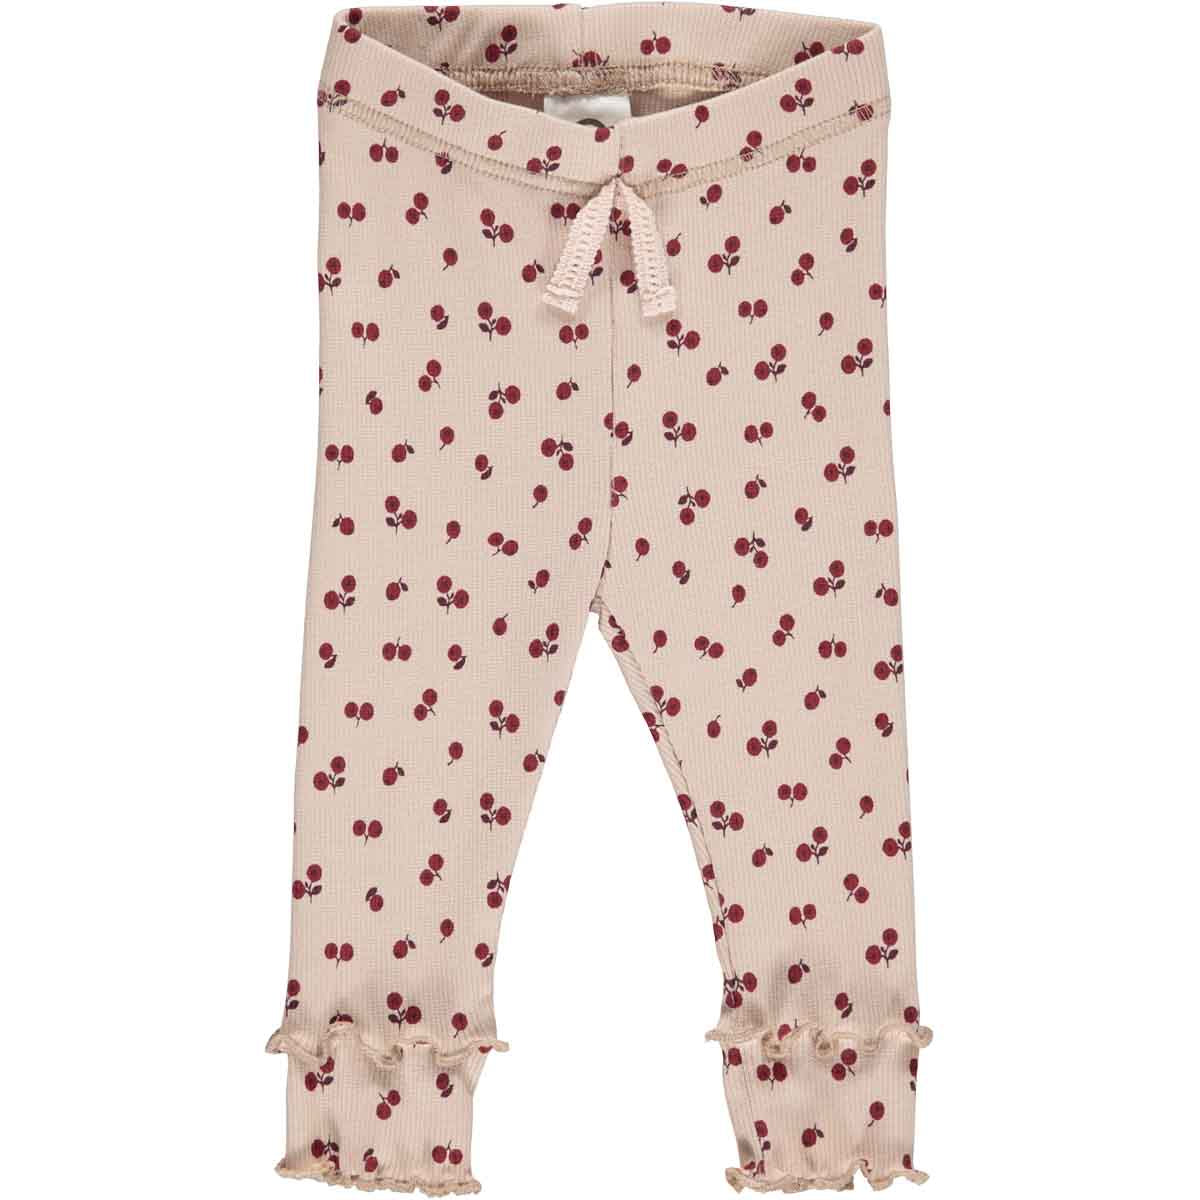 Berry leggings baby - Spa rose/Fig/Berry red